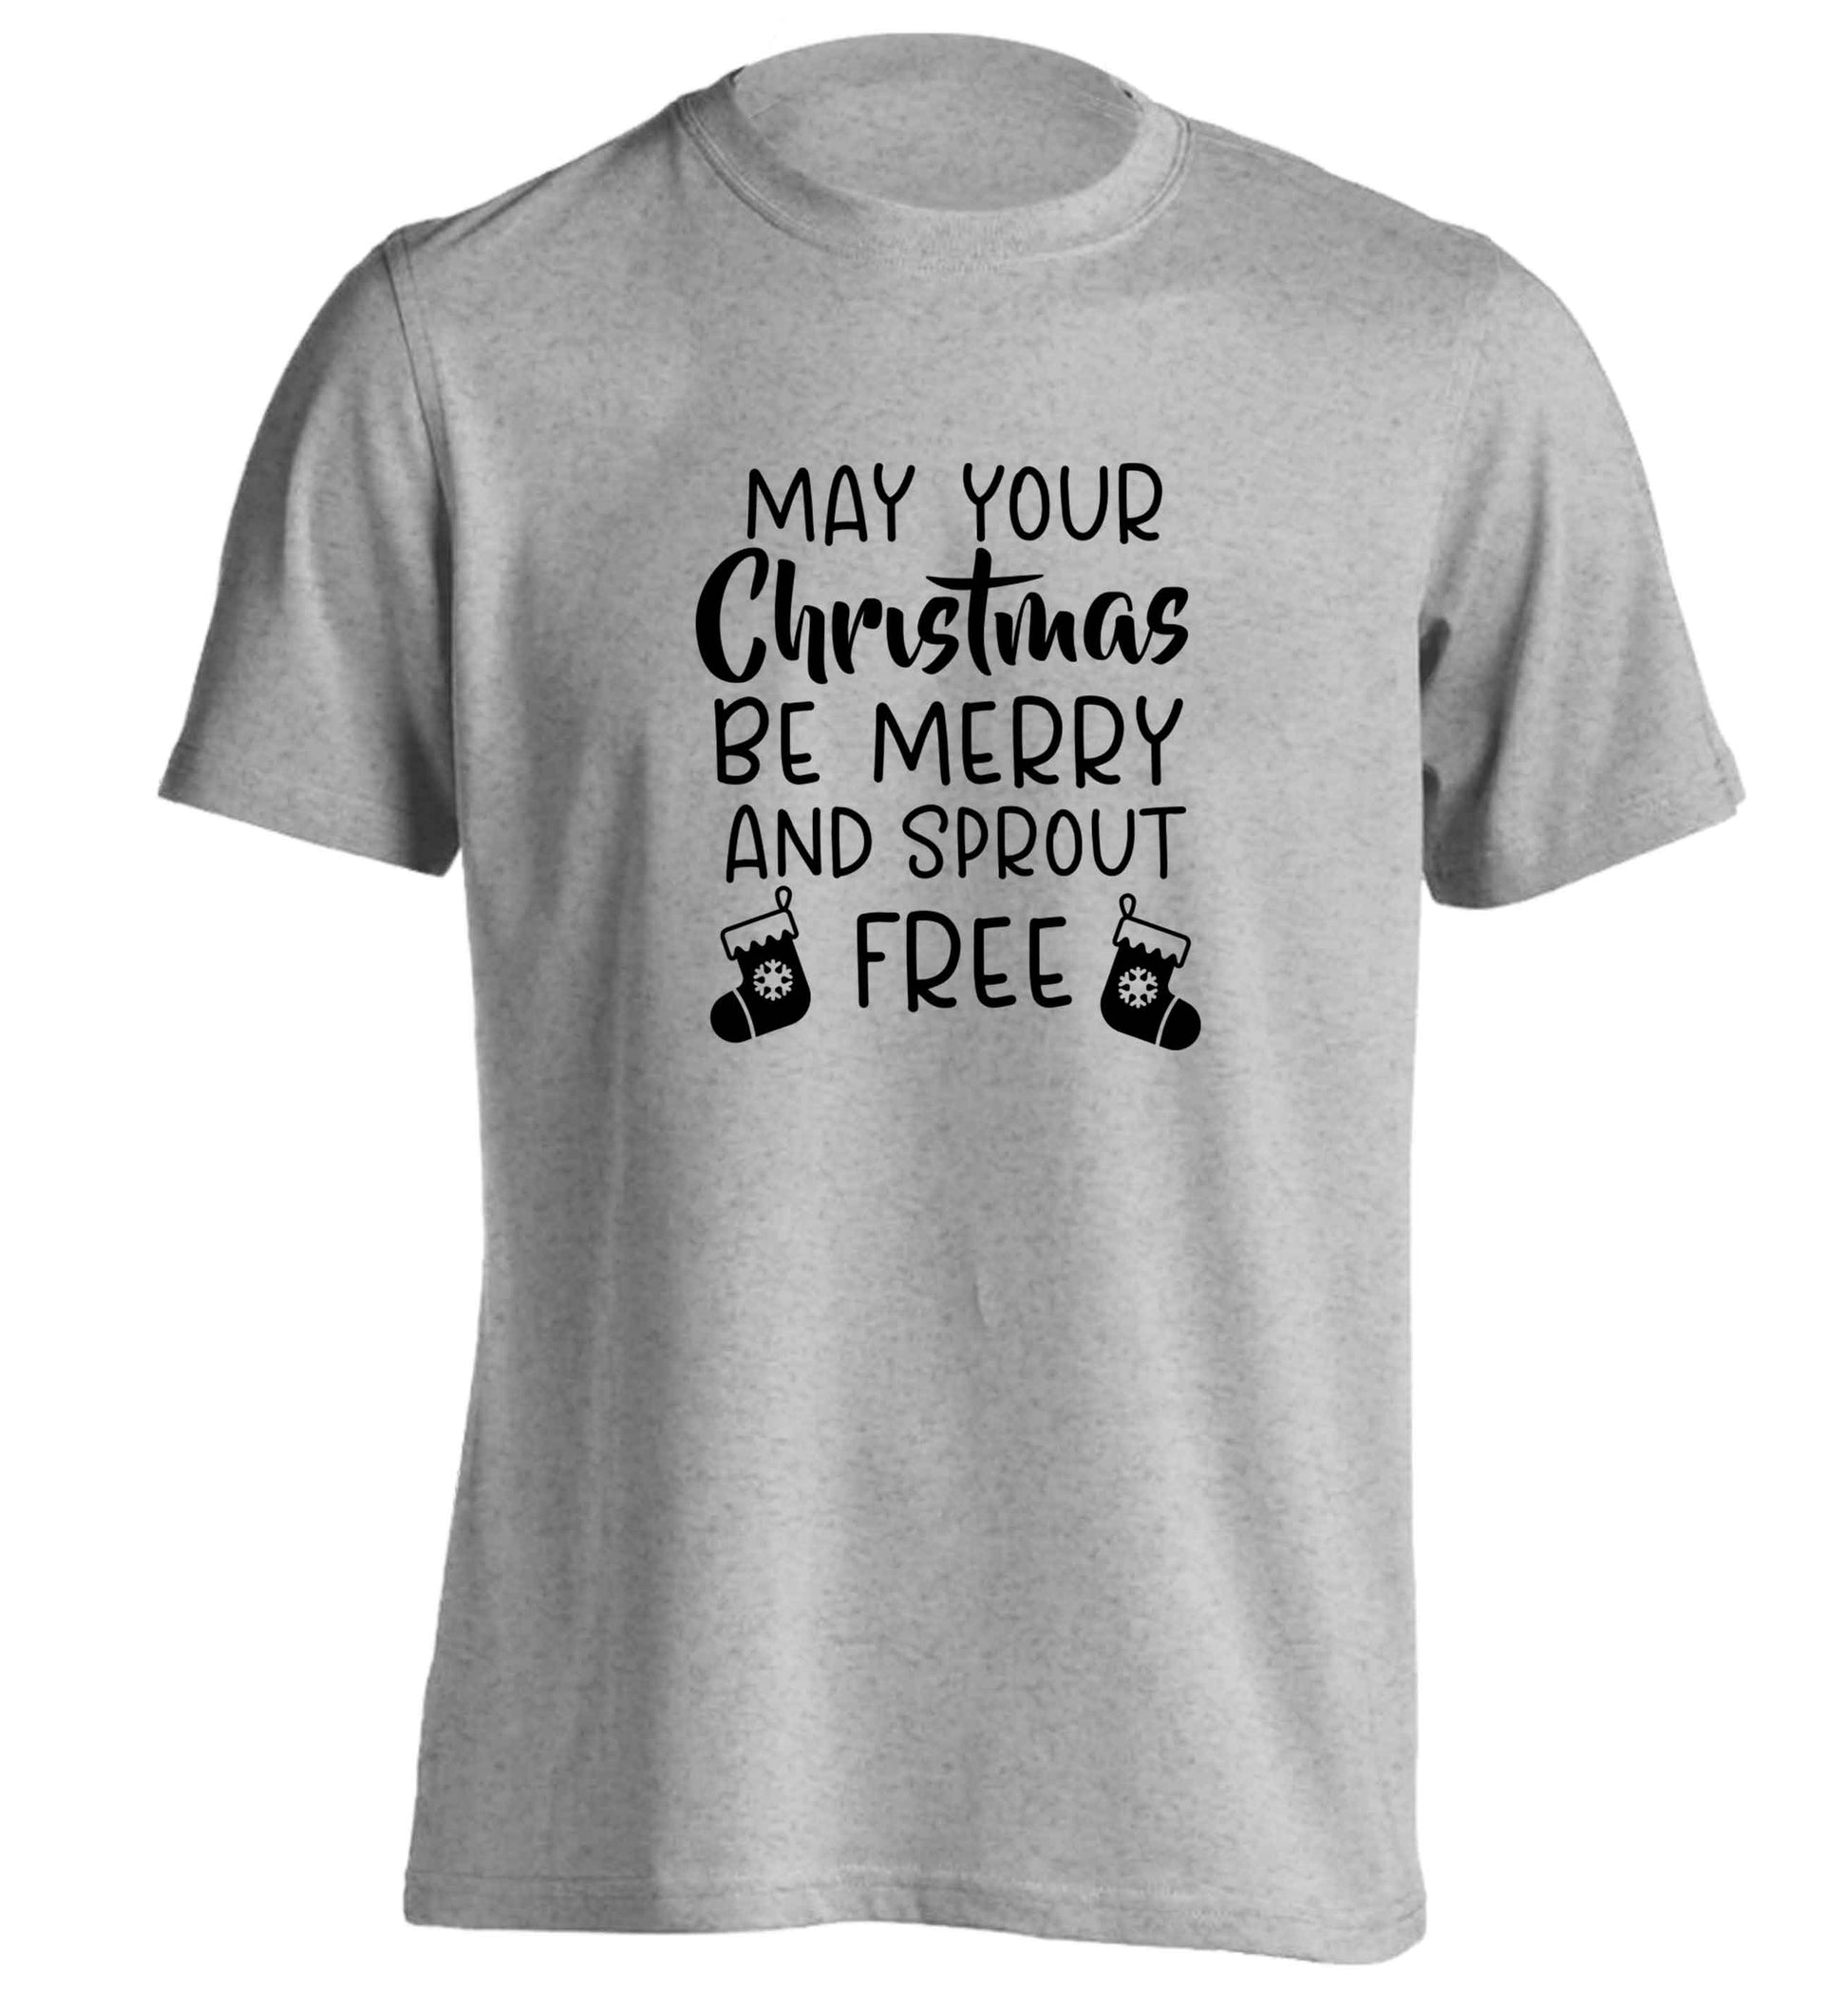 May your Christmas be merry and sprout free adults unisex grey Tshirt 2XL